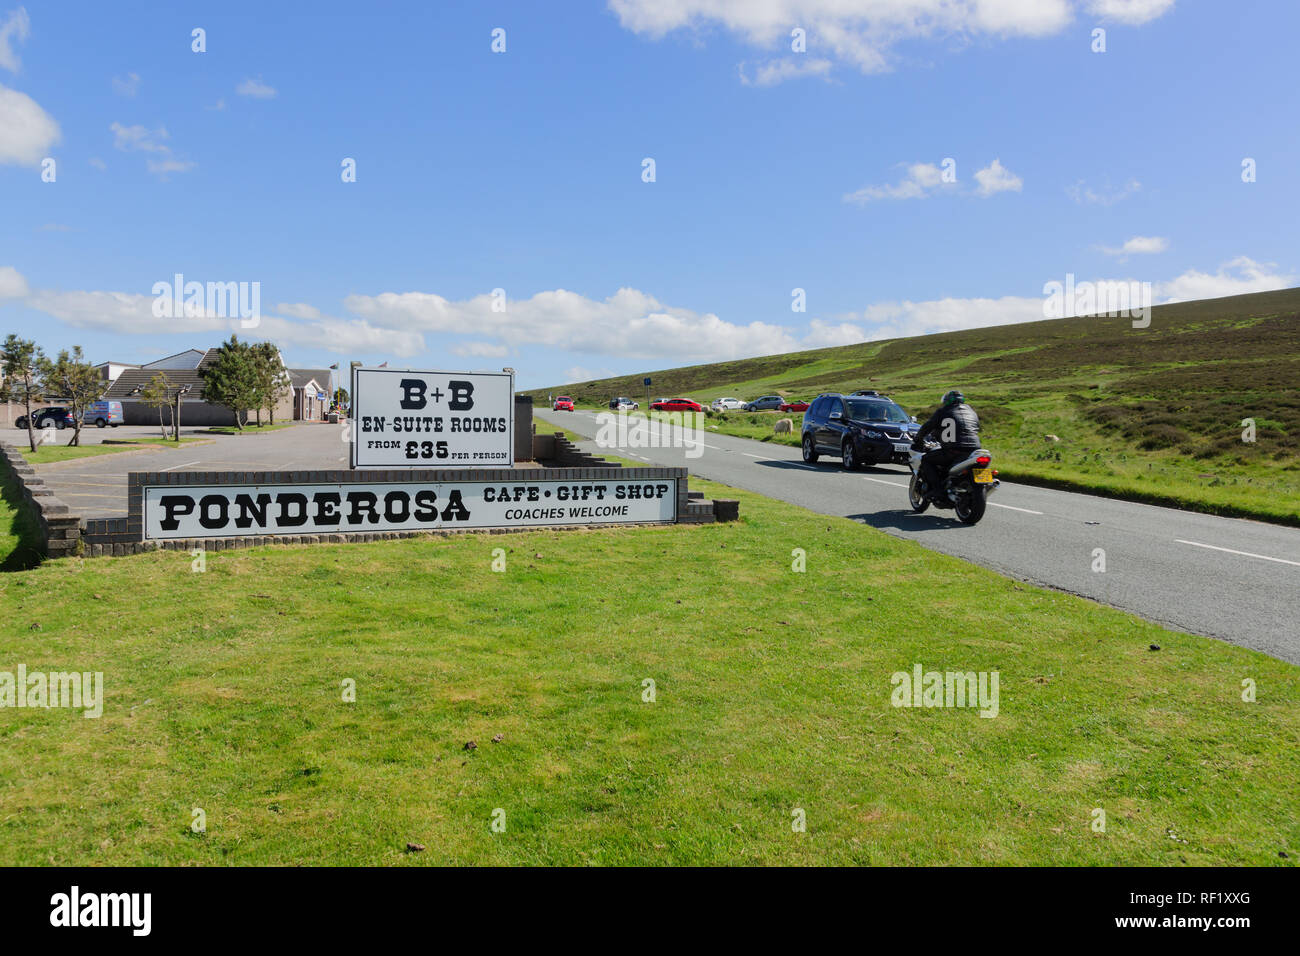 The Ponderosa Cafe and gift shop on Horseshoe Pass in Llantysilio above Llangollen North Wales Stock Photo